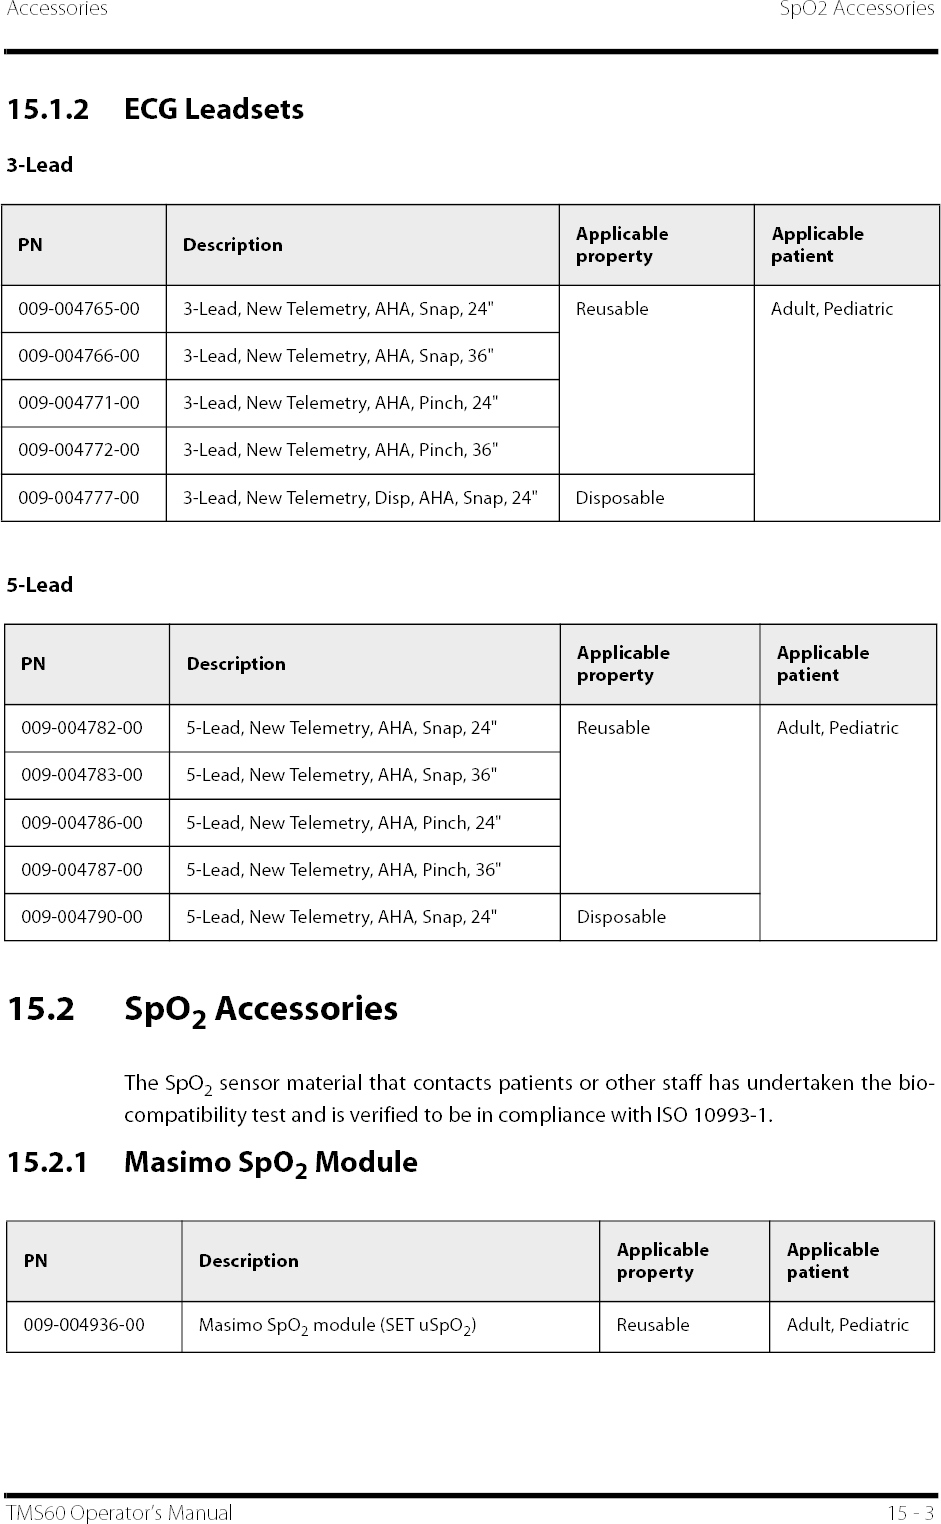 Accessories SpO2 AccessoriesTMS60 Operator’s Manual 15 - 315.1.2 ECG Leadsets3-Lead5-Lead15.2 SpO2 AccessoriesThe SpO2 sensor material that contacts patients or other staff has undertaken the bio-compatibility test and is verified to be in compliance with ISO 10993-1.15.2.1 Masimo SpO2 ModulePN Description Applicable propertyApplicable patient009-004765-00 3-Lead, New Telemetry, AHA, Snap, 24&quot; Reusable Adult, Pediatric009-004766-00 3-Lead, New Telemetry, AHA, Snap, 36&quot;009-004771-00 3-Lead, New Telemetry, AHA, Pinch, 24&quot;009-004772-00 3-Lead, New Telemetry, AHA, Pinch, 36&quot;009-004777-00 3-Lead, New Telemetry, Disp, AHA, Snap, 24&quot; DisposablePN Description Applicable propertyApplicable patient009-004782-00 5-Lead, New Telemetry, AHA, Snap, 24&quot; Reusable Adult, Pediatric009-004783-00 5-Lead, New Telemetry, AHA, Snap, 36&quot;009-004786-00 5-Lead, New Telemetry, AHA, Pinch, 24&quot;009-004787-00 5-Lead, New Telemetry, AHA, Pinch, 36&quot;009-004790-00 5-Lead, New Telemetry, AHA, Snap, 24&quot; DisposablePN Description Applicable propertyApplicable patient009-004936-00 Masimo SpO2 module (SET uSpO2) Reusable Adult, Pediatric